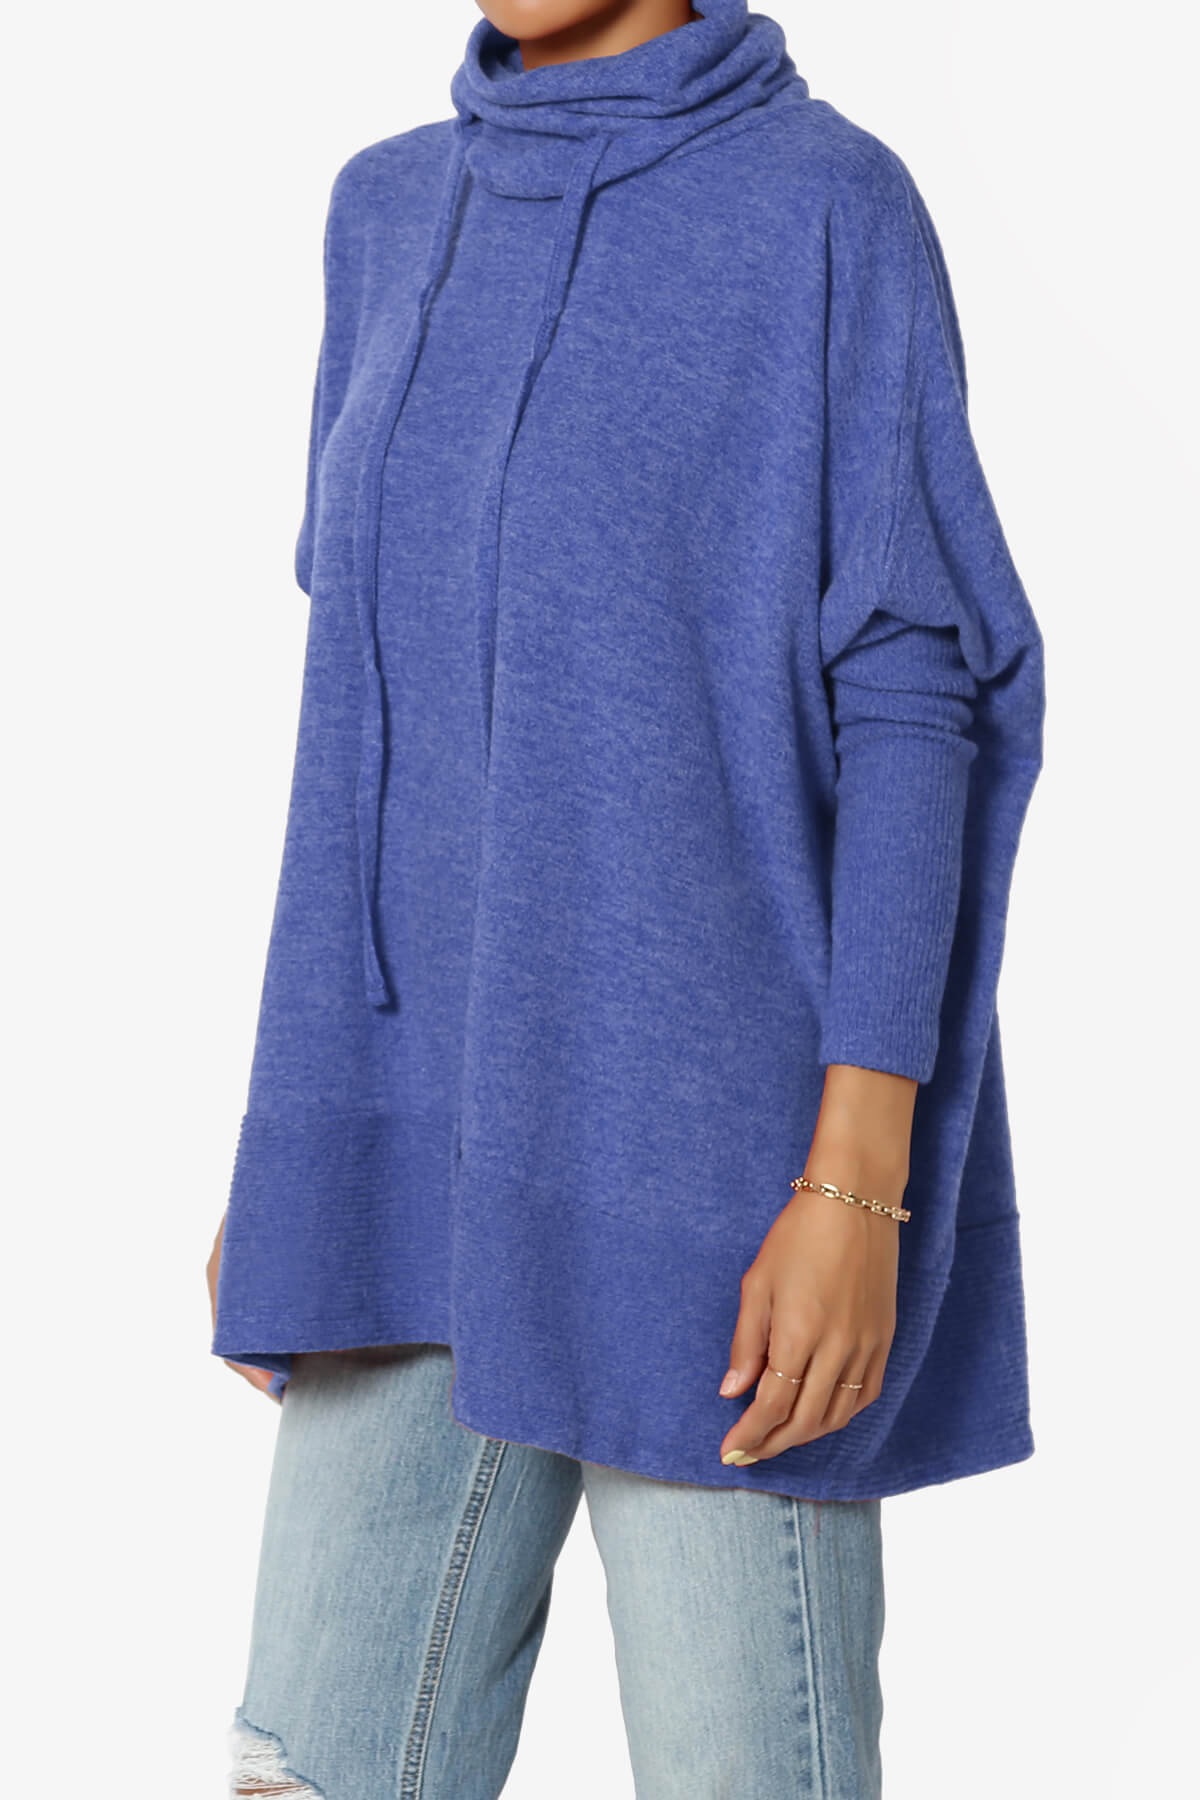 Load image into Gallery viewer, Barclay Cowl Neck Melange Knit Oversized Sweater BRIGHT BLUE_3
